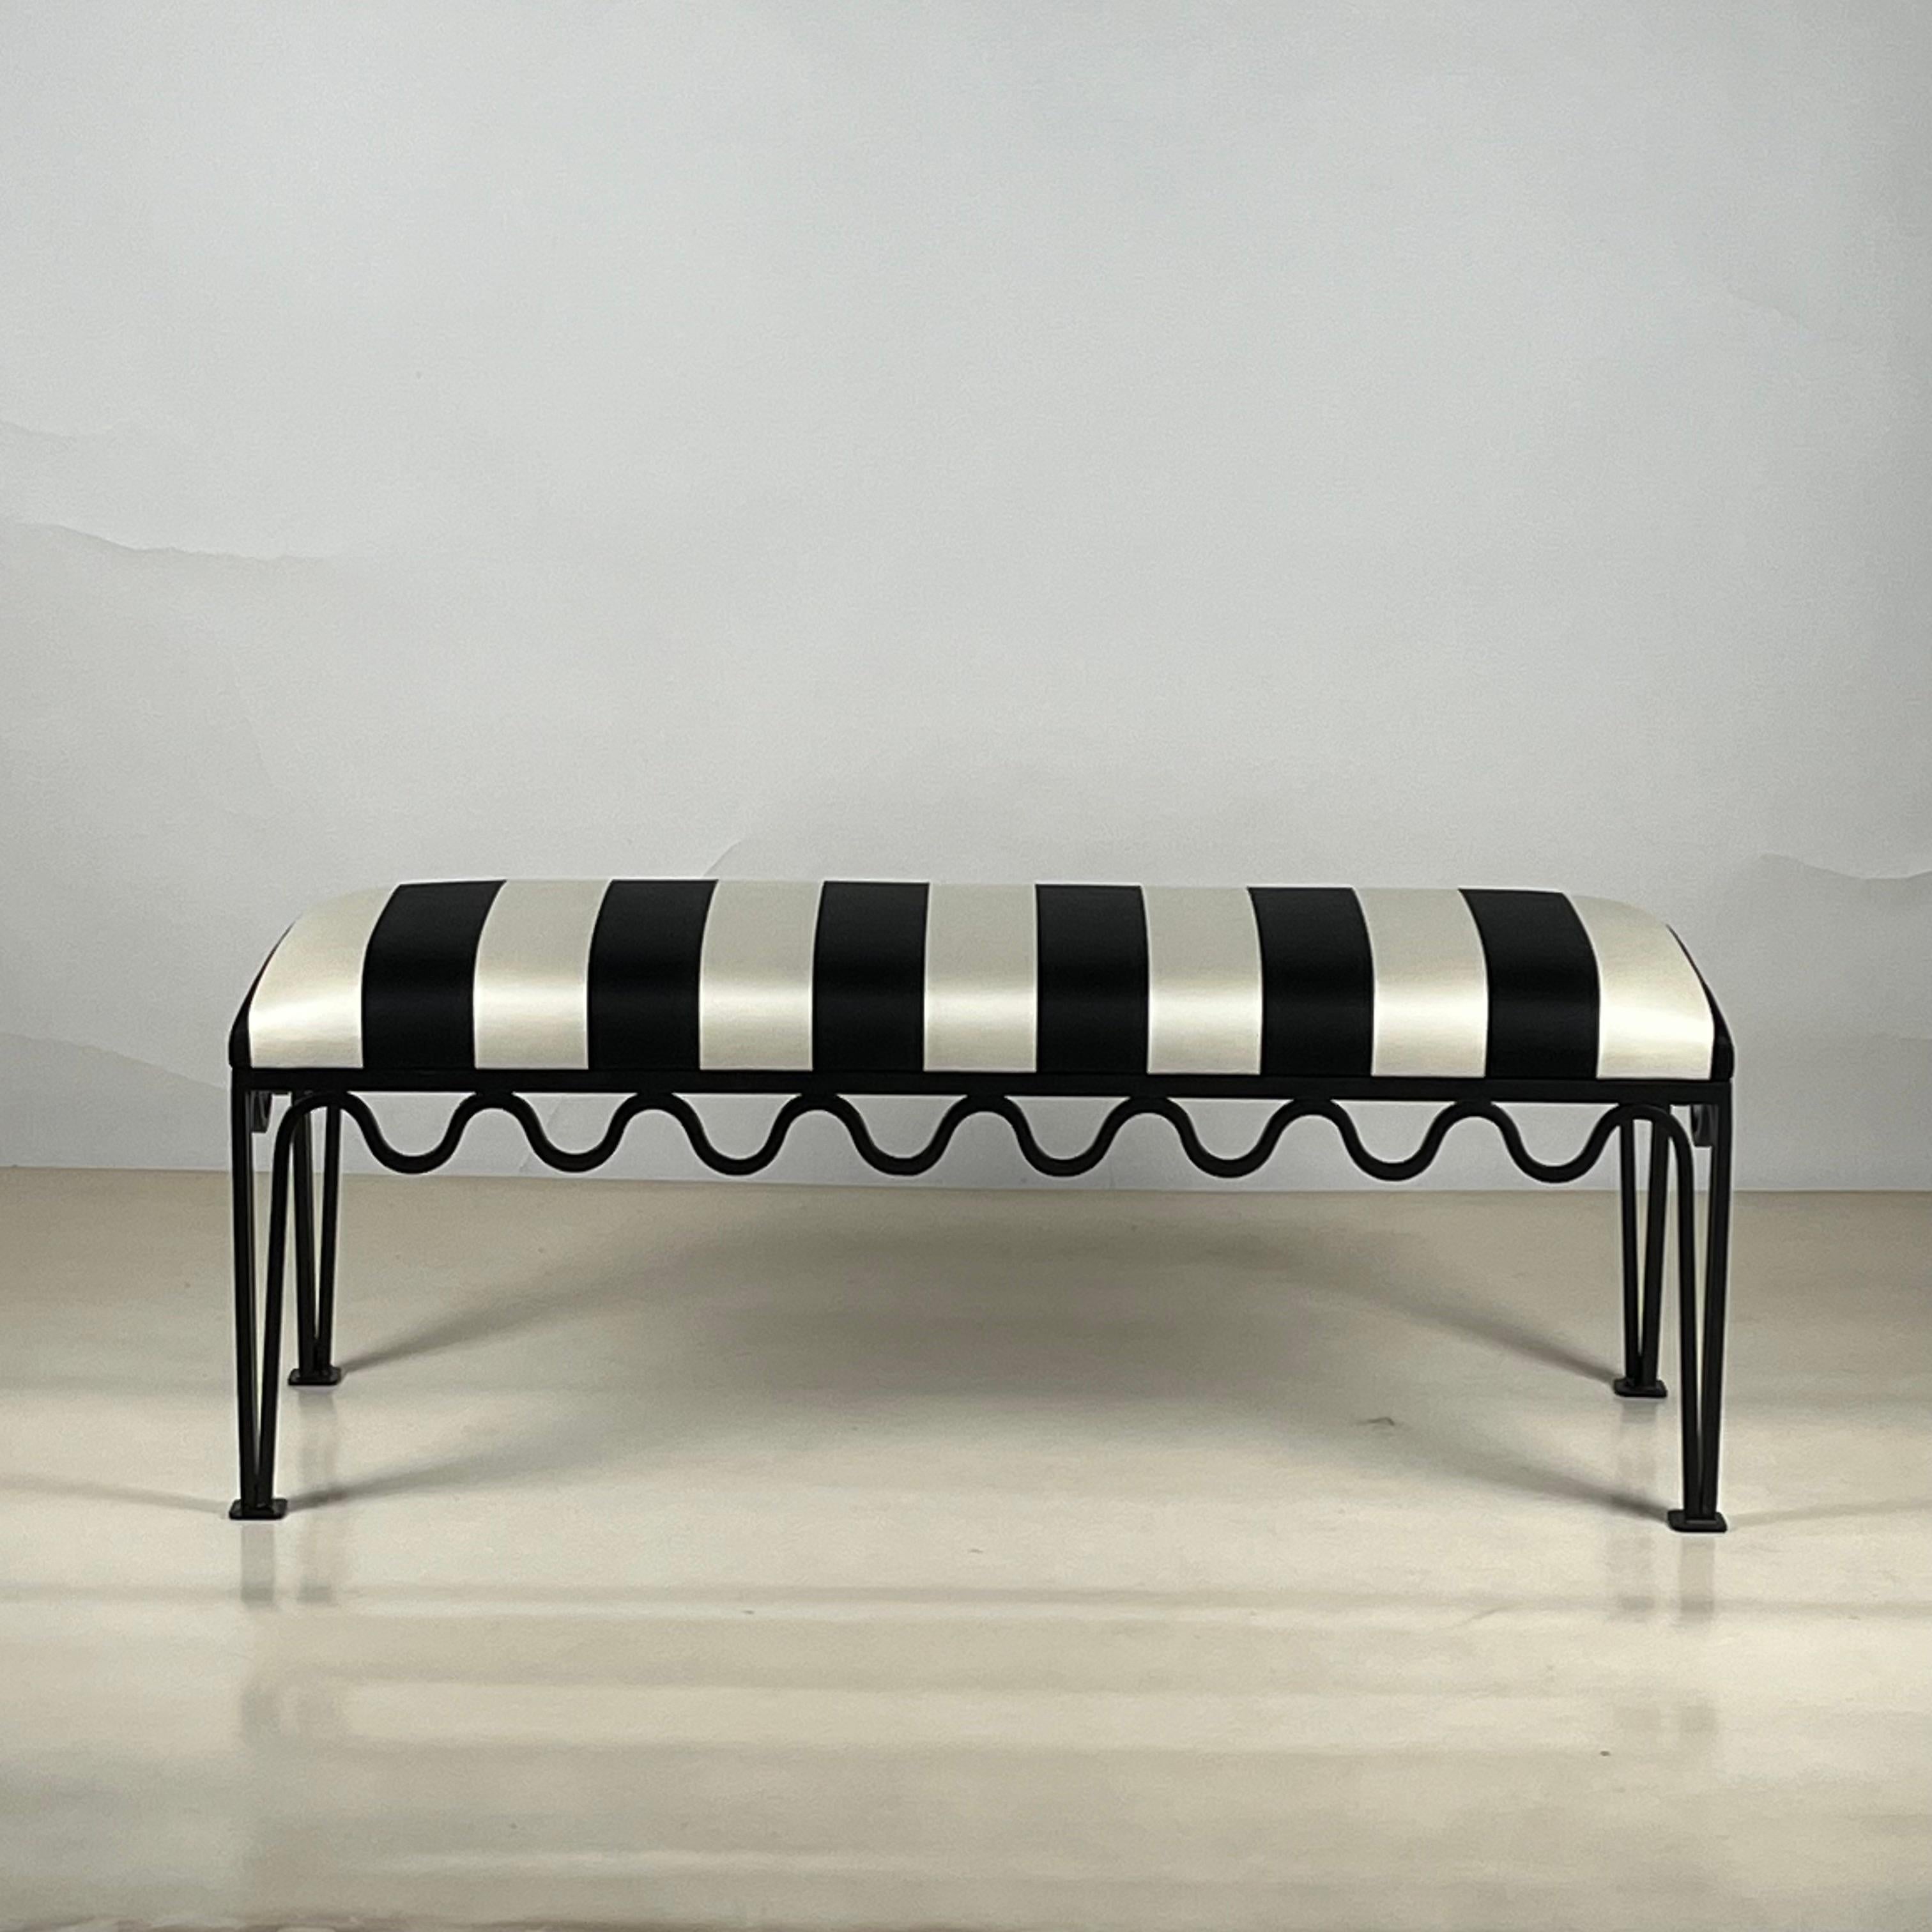 Narrow Méandre™ bench by DESIGN FRÈRES® in COM.

Perfect for an entry, a hallway or a the foot of a bed.

COM: 1 yard for the. bench, to be sent to our workroom when your order is confirmed.

Shown here in DEDAR Belmondo Black & White (col. 1